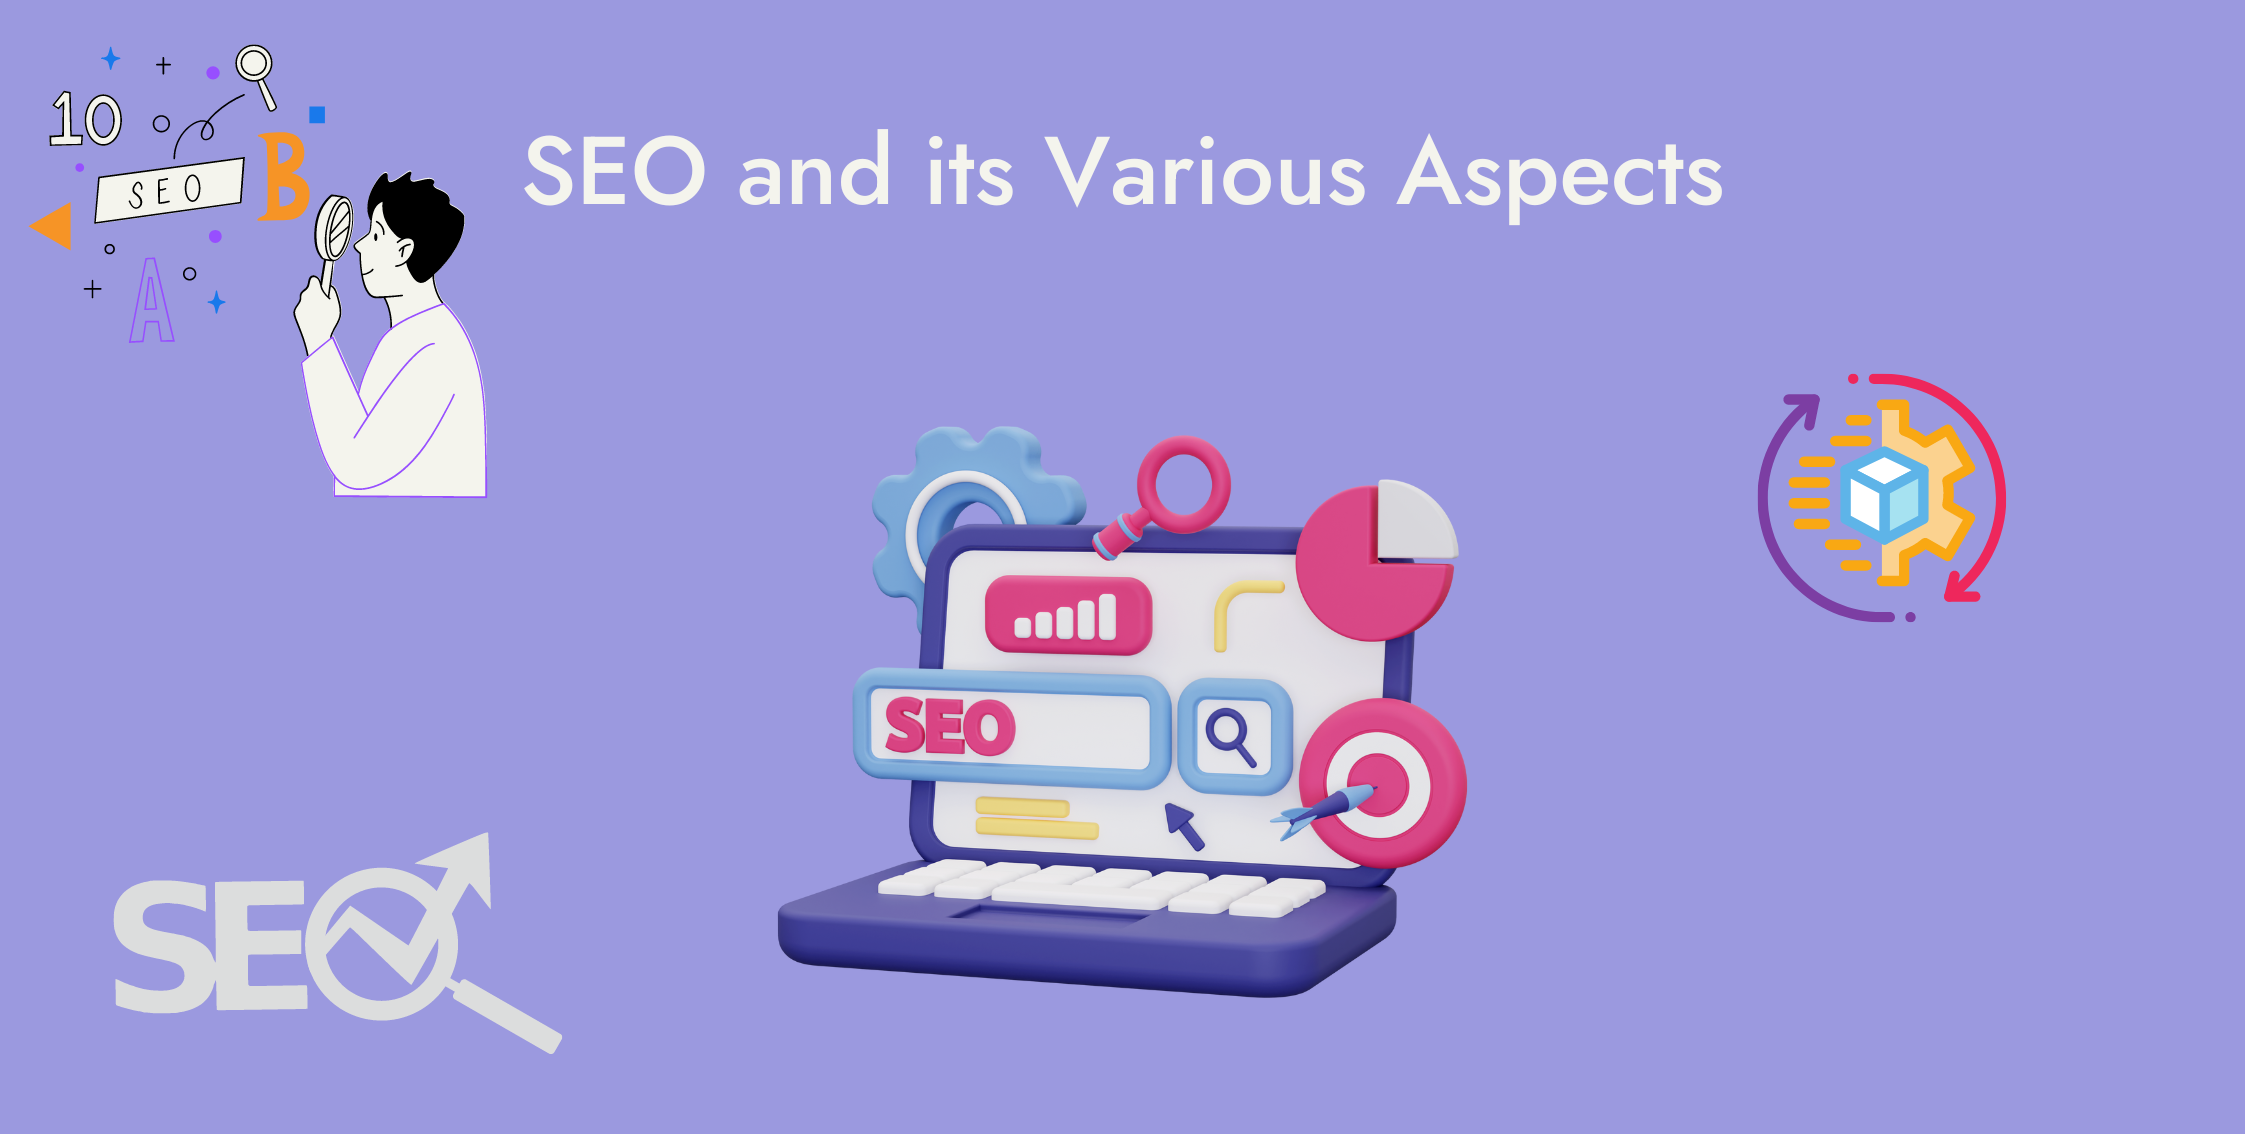 SEO and its different aspects